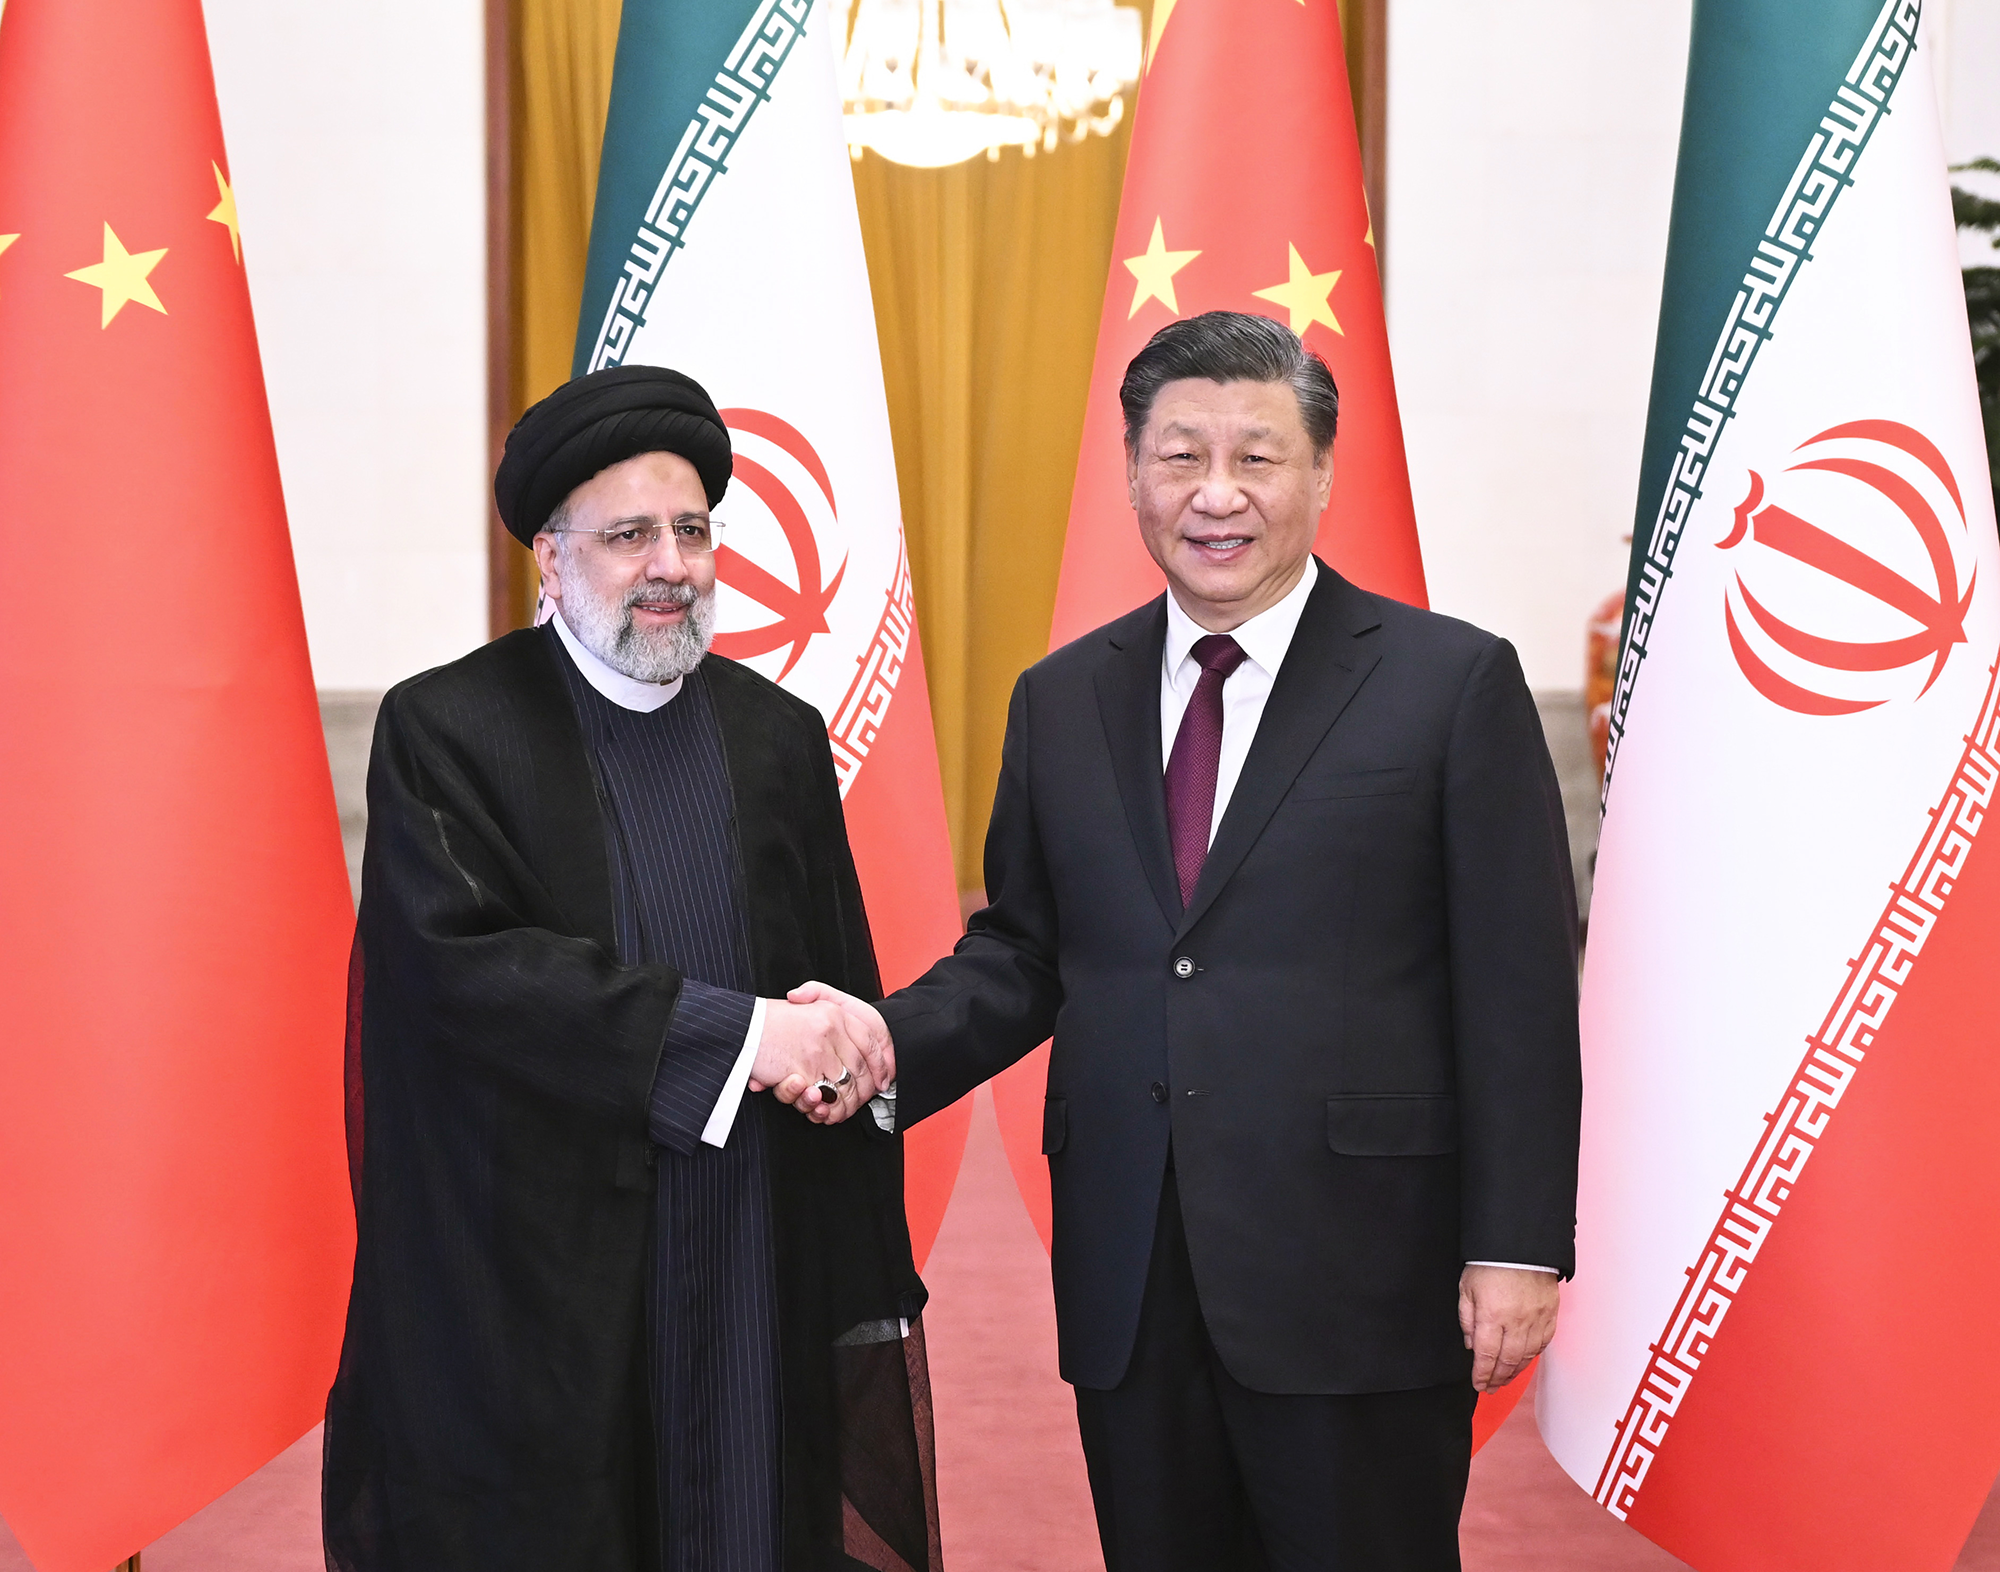 Chinese President Xi Jinping welcomes visiting Iranian President Ebrahim Raisi at the Great Hall of the People in Beijing on February 14, 2023. Photo: Xinhua